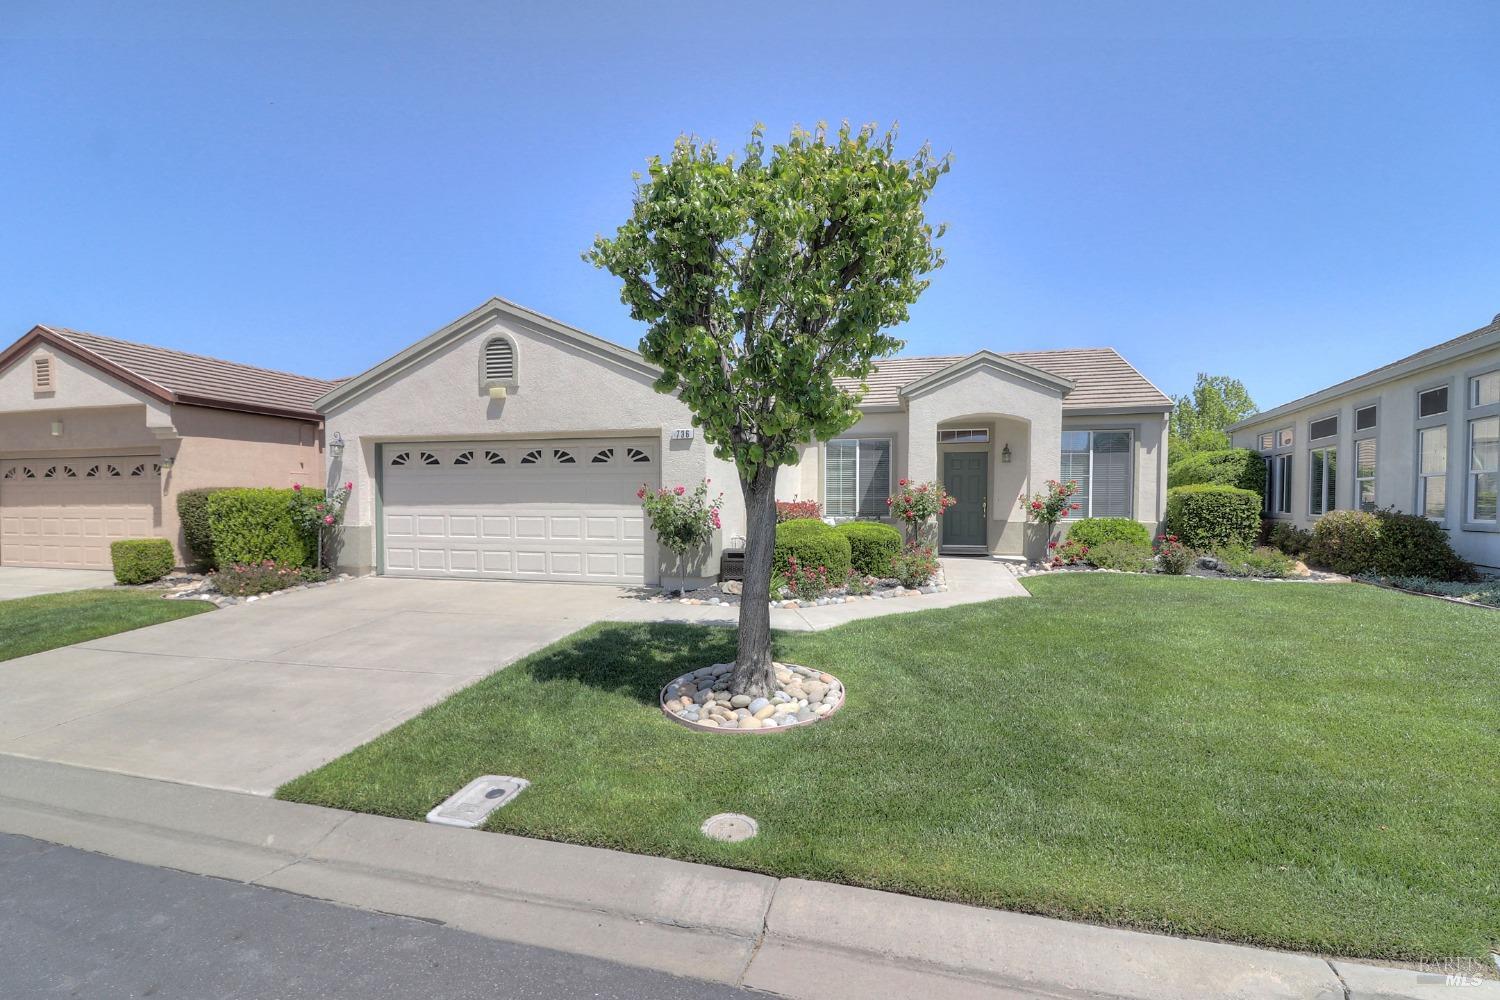 You'll be greeted by lovely roses and manicured bushes and flowers as you approach this meticulously cared for home. New HVAC unit just 2 years old, whole home water filter, garage cabinets, and remodeled bathrooms.